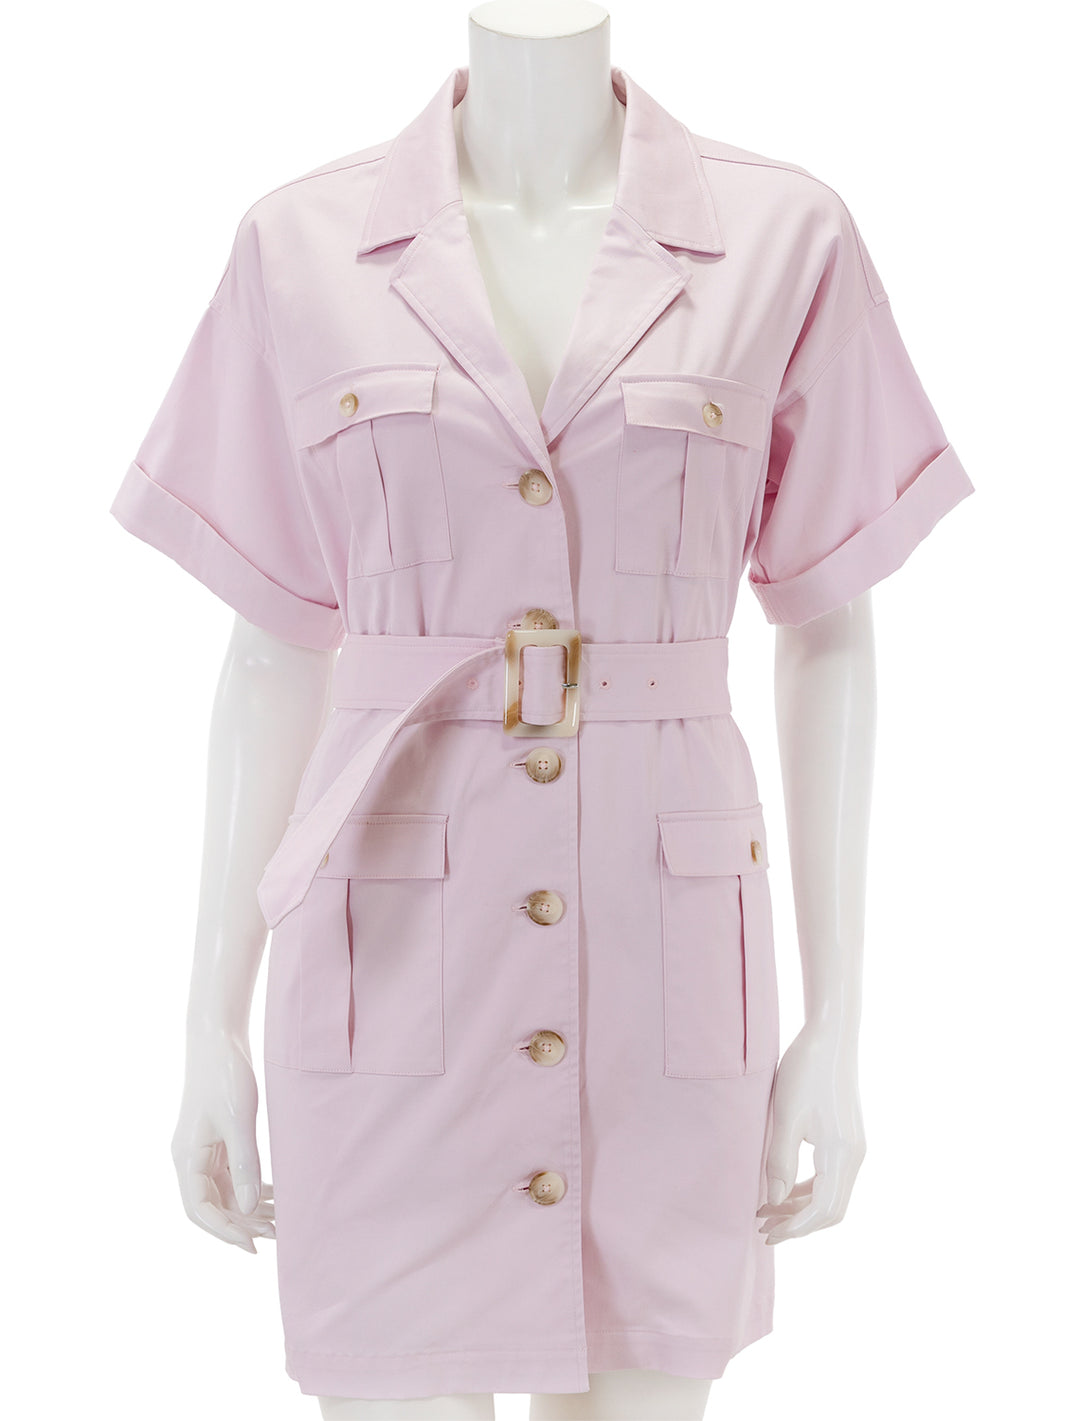 Front view of L'Agence's everest safari shirt dress in lilac snow.